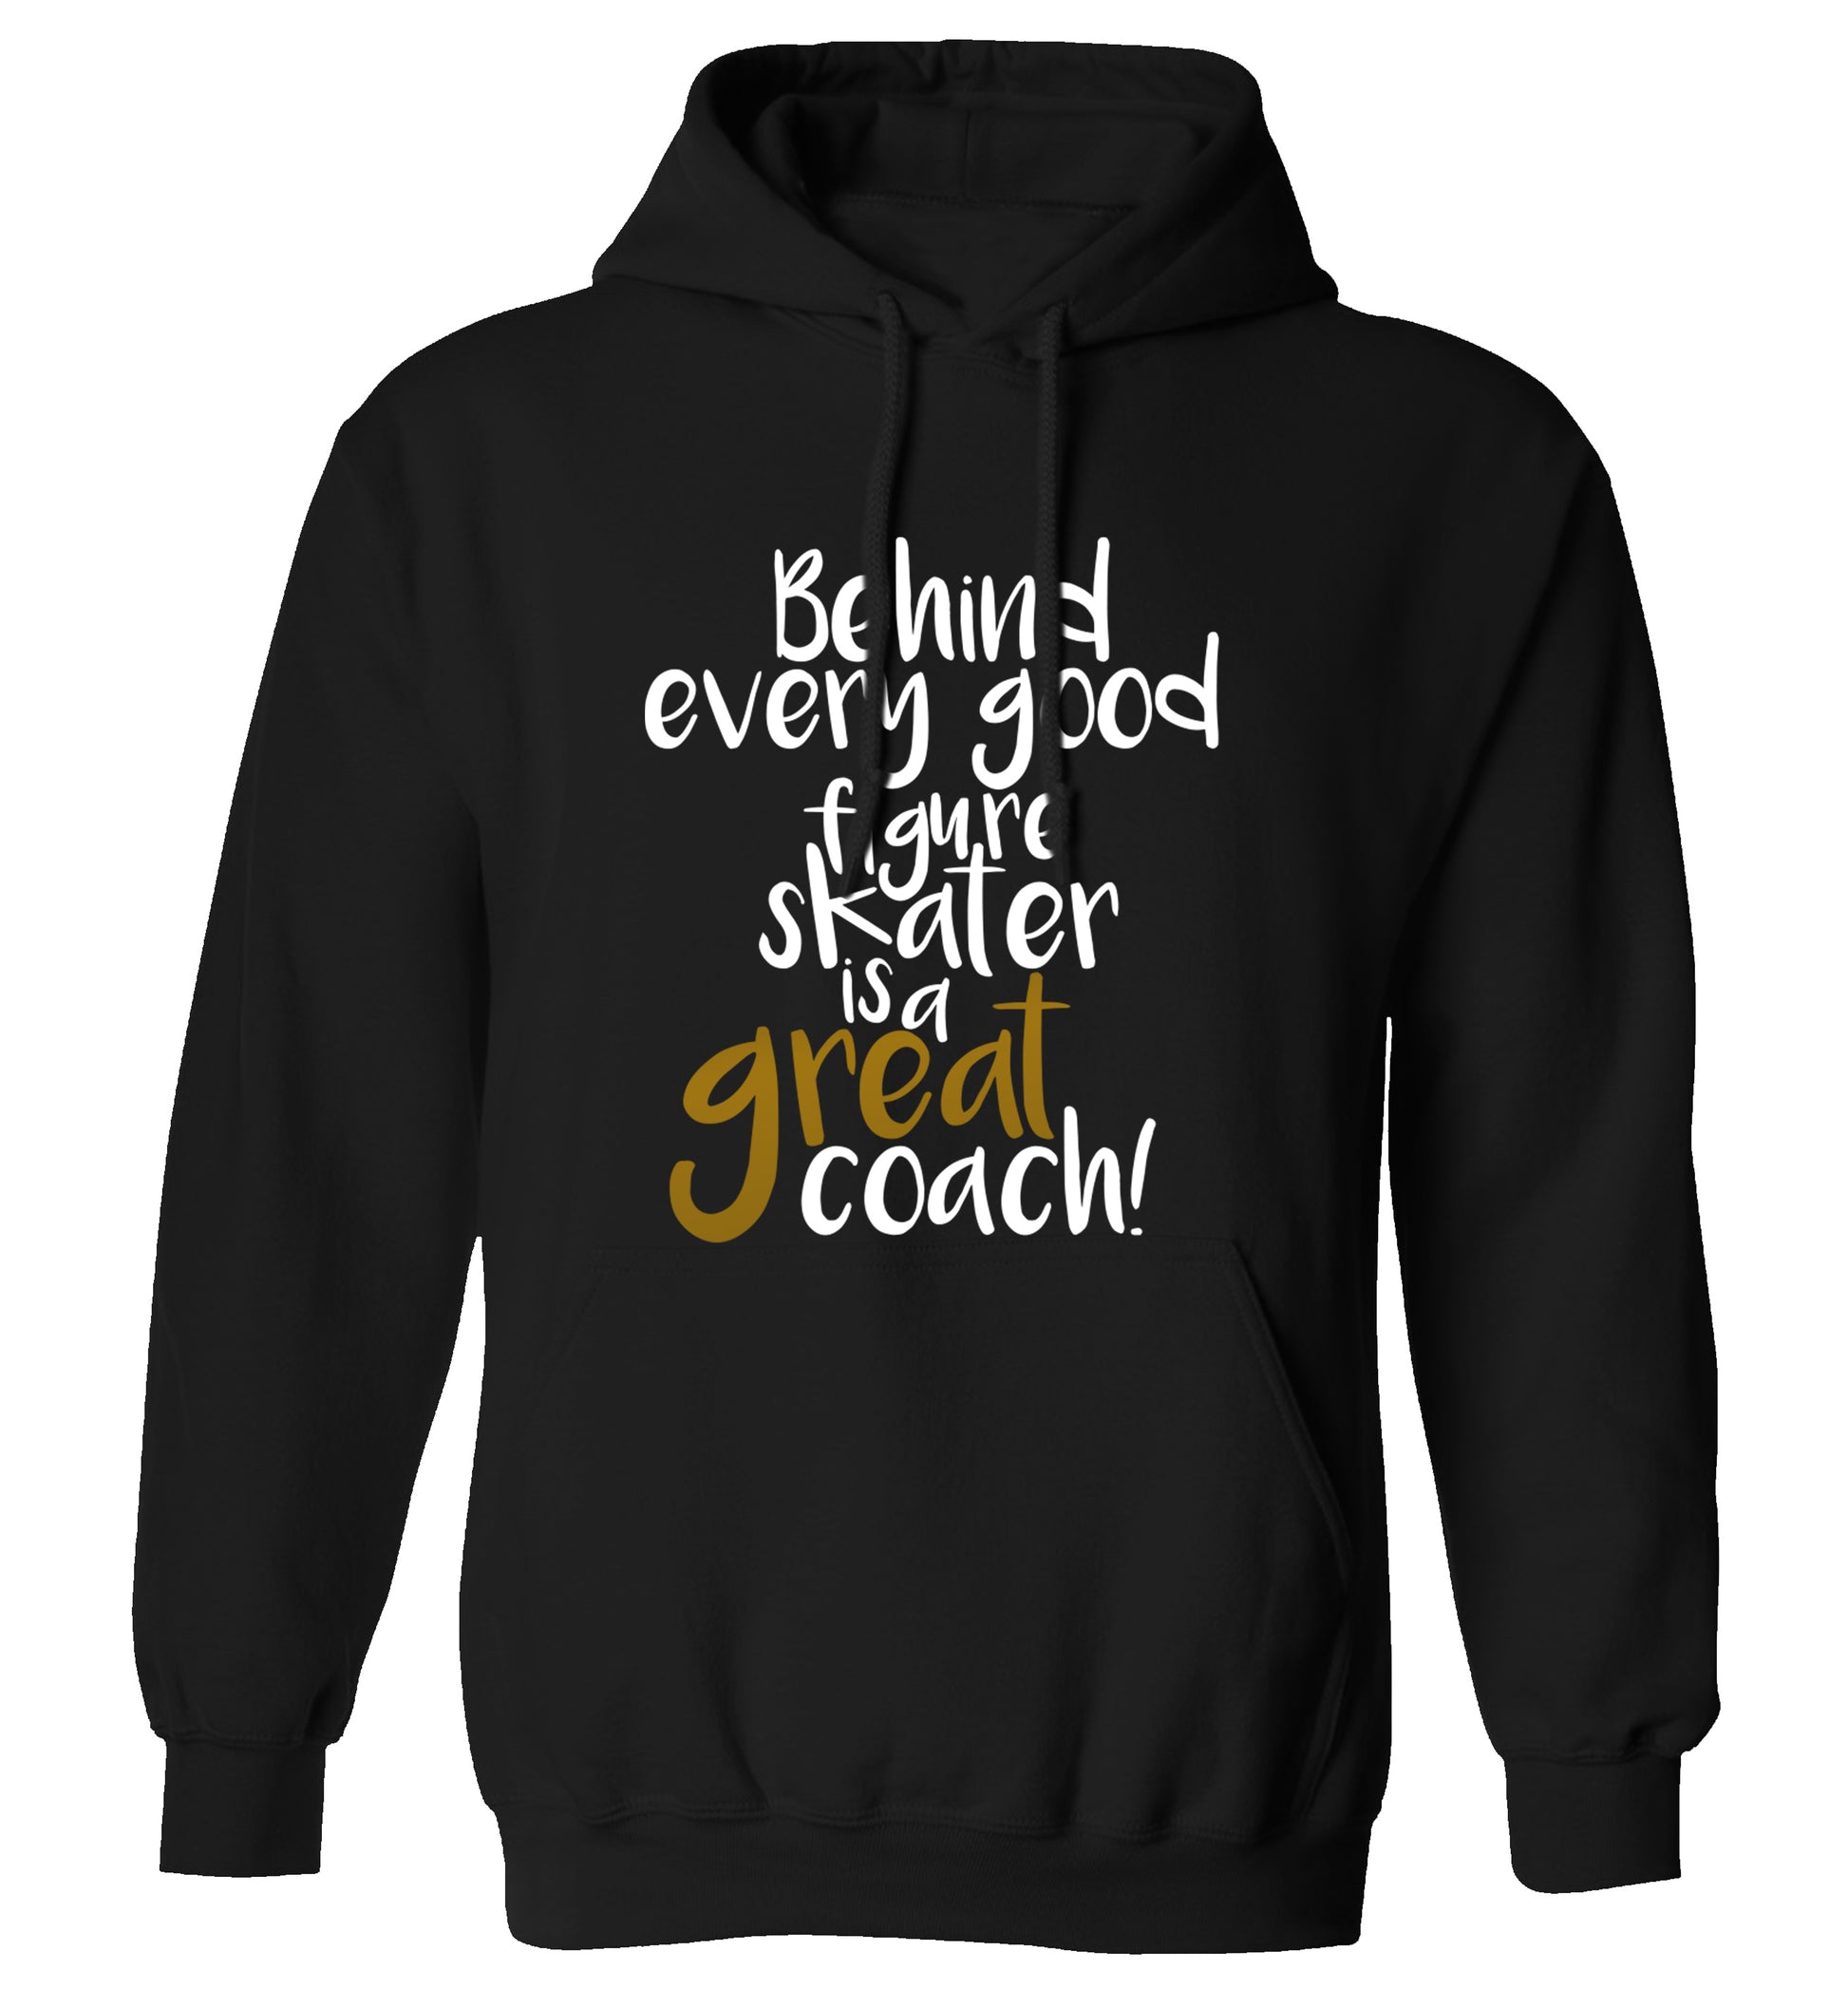 Behind every good figure skater is a great coach adults unisexblack hoodie 2XL